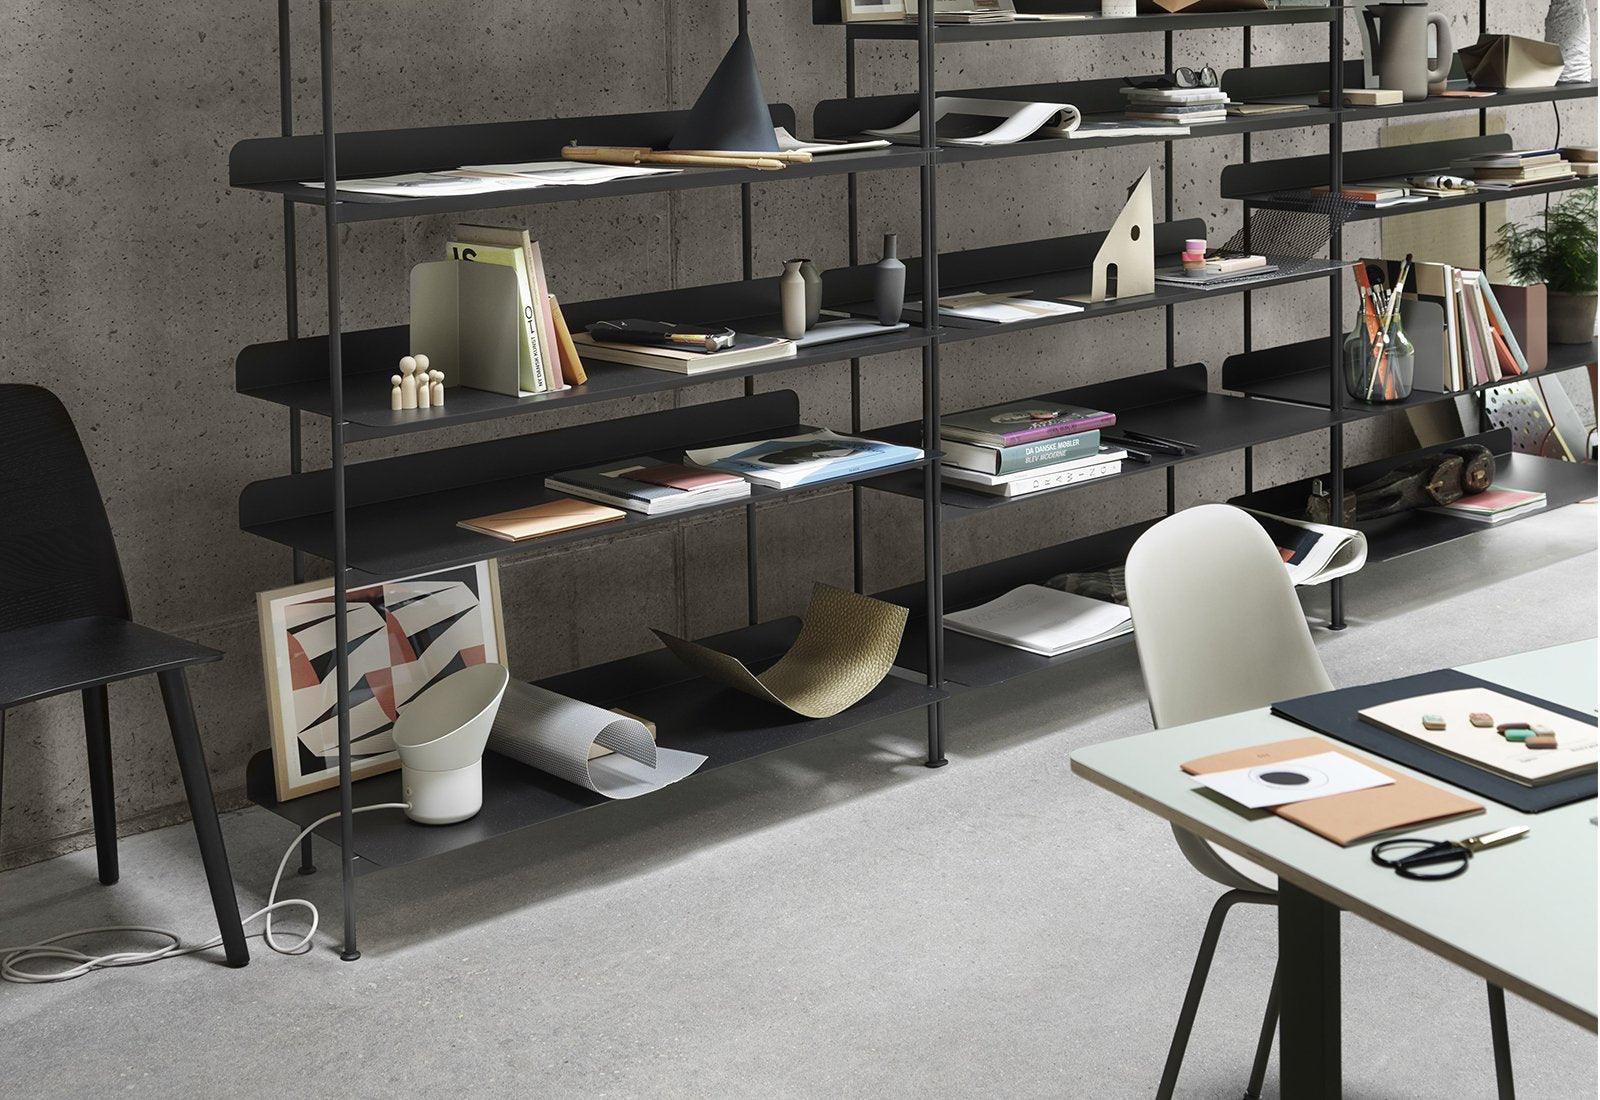  The Compile shelving system by Cecilie Manz for Muuto in black.